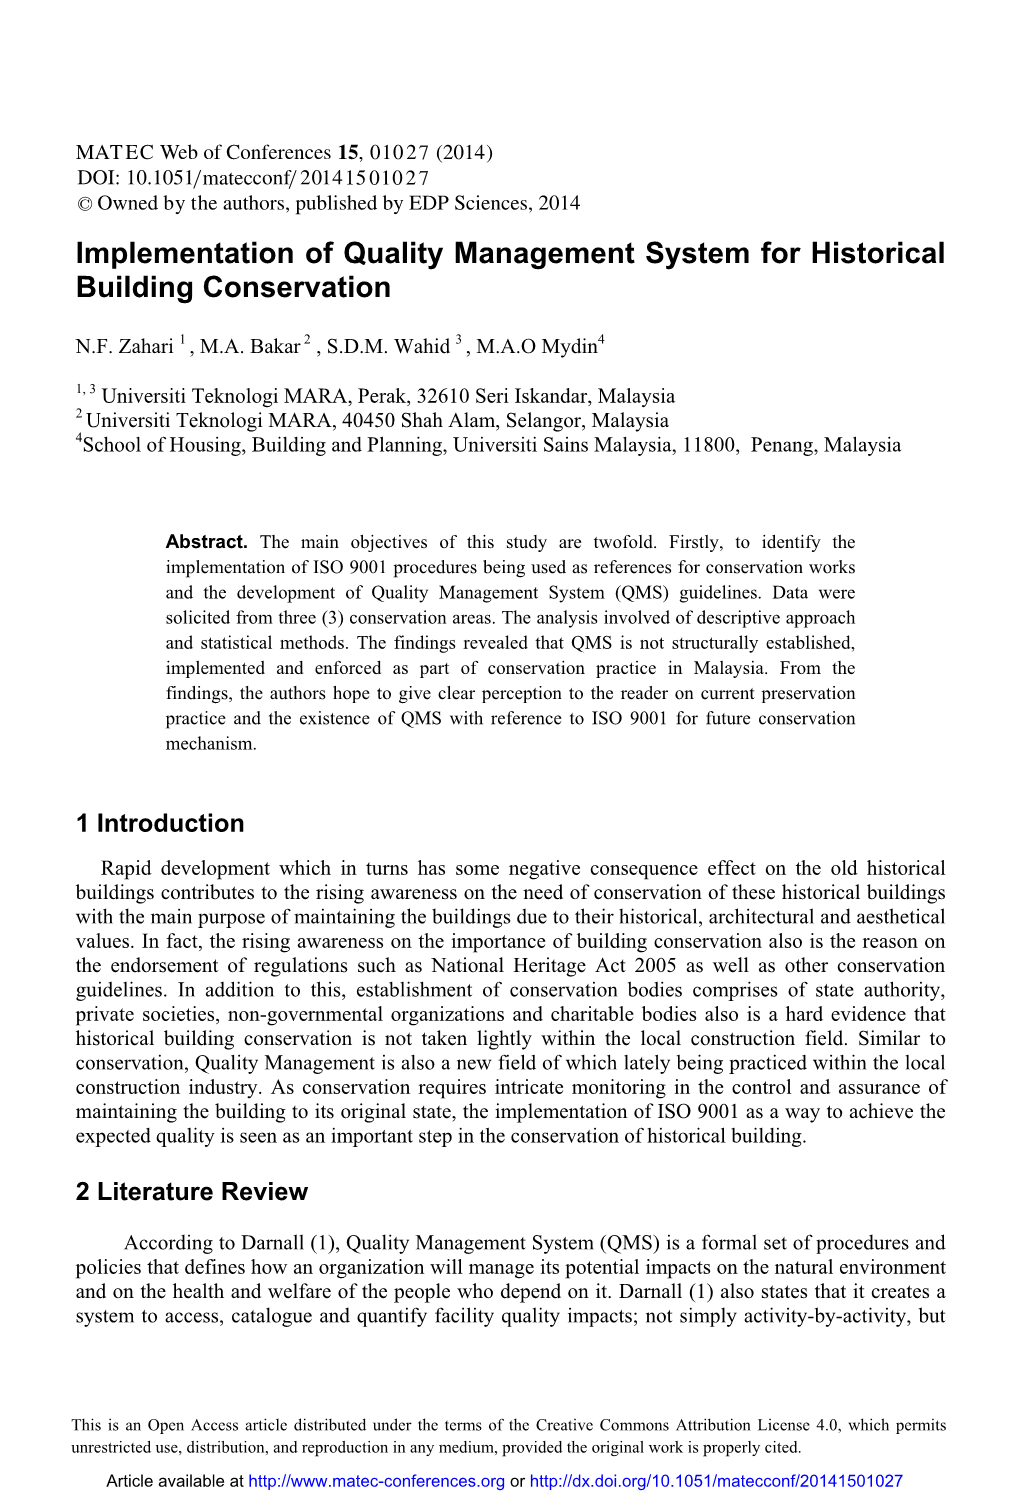 Implementation of Quality Management System for Historical Building Conservation